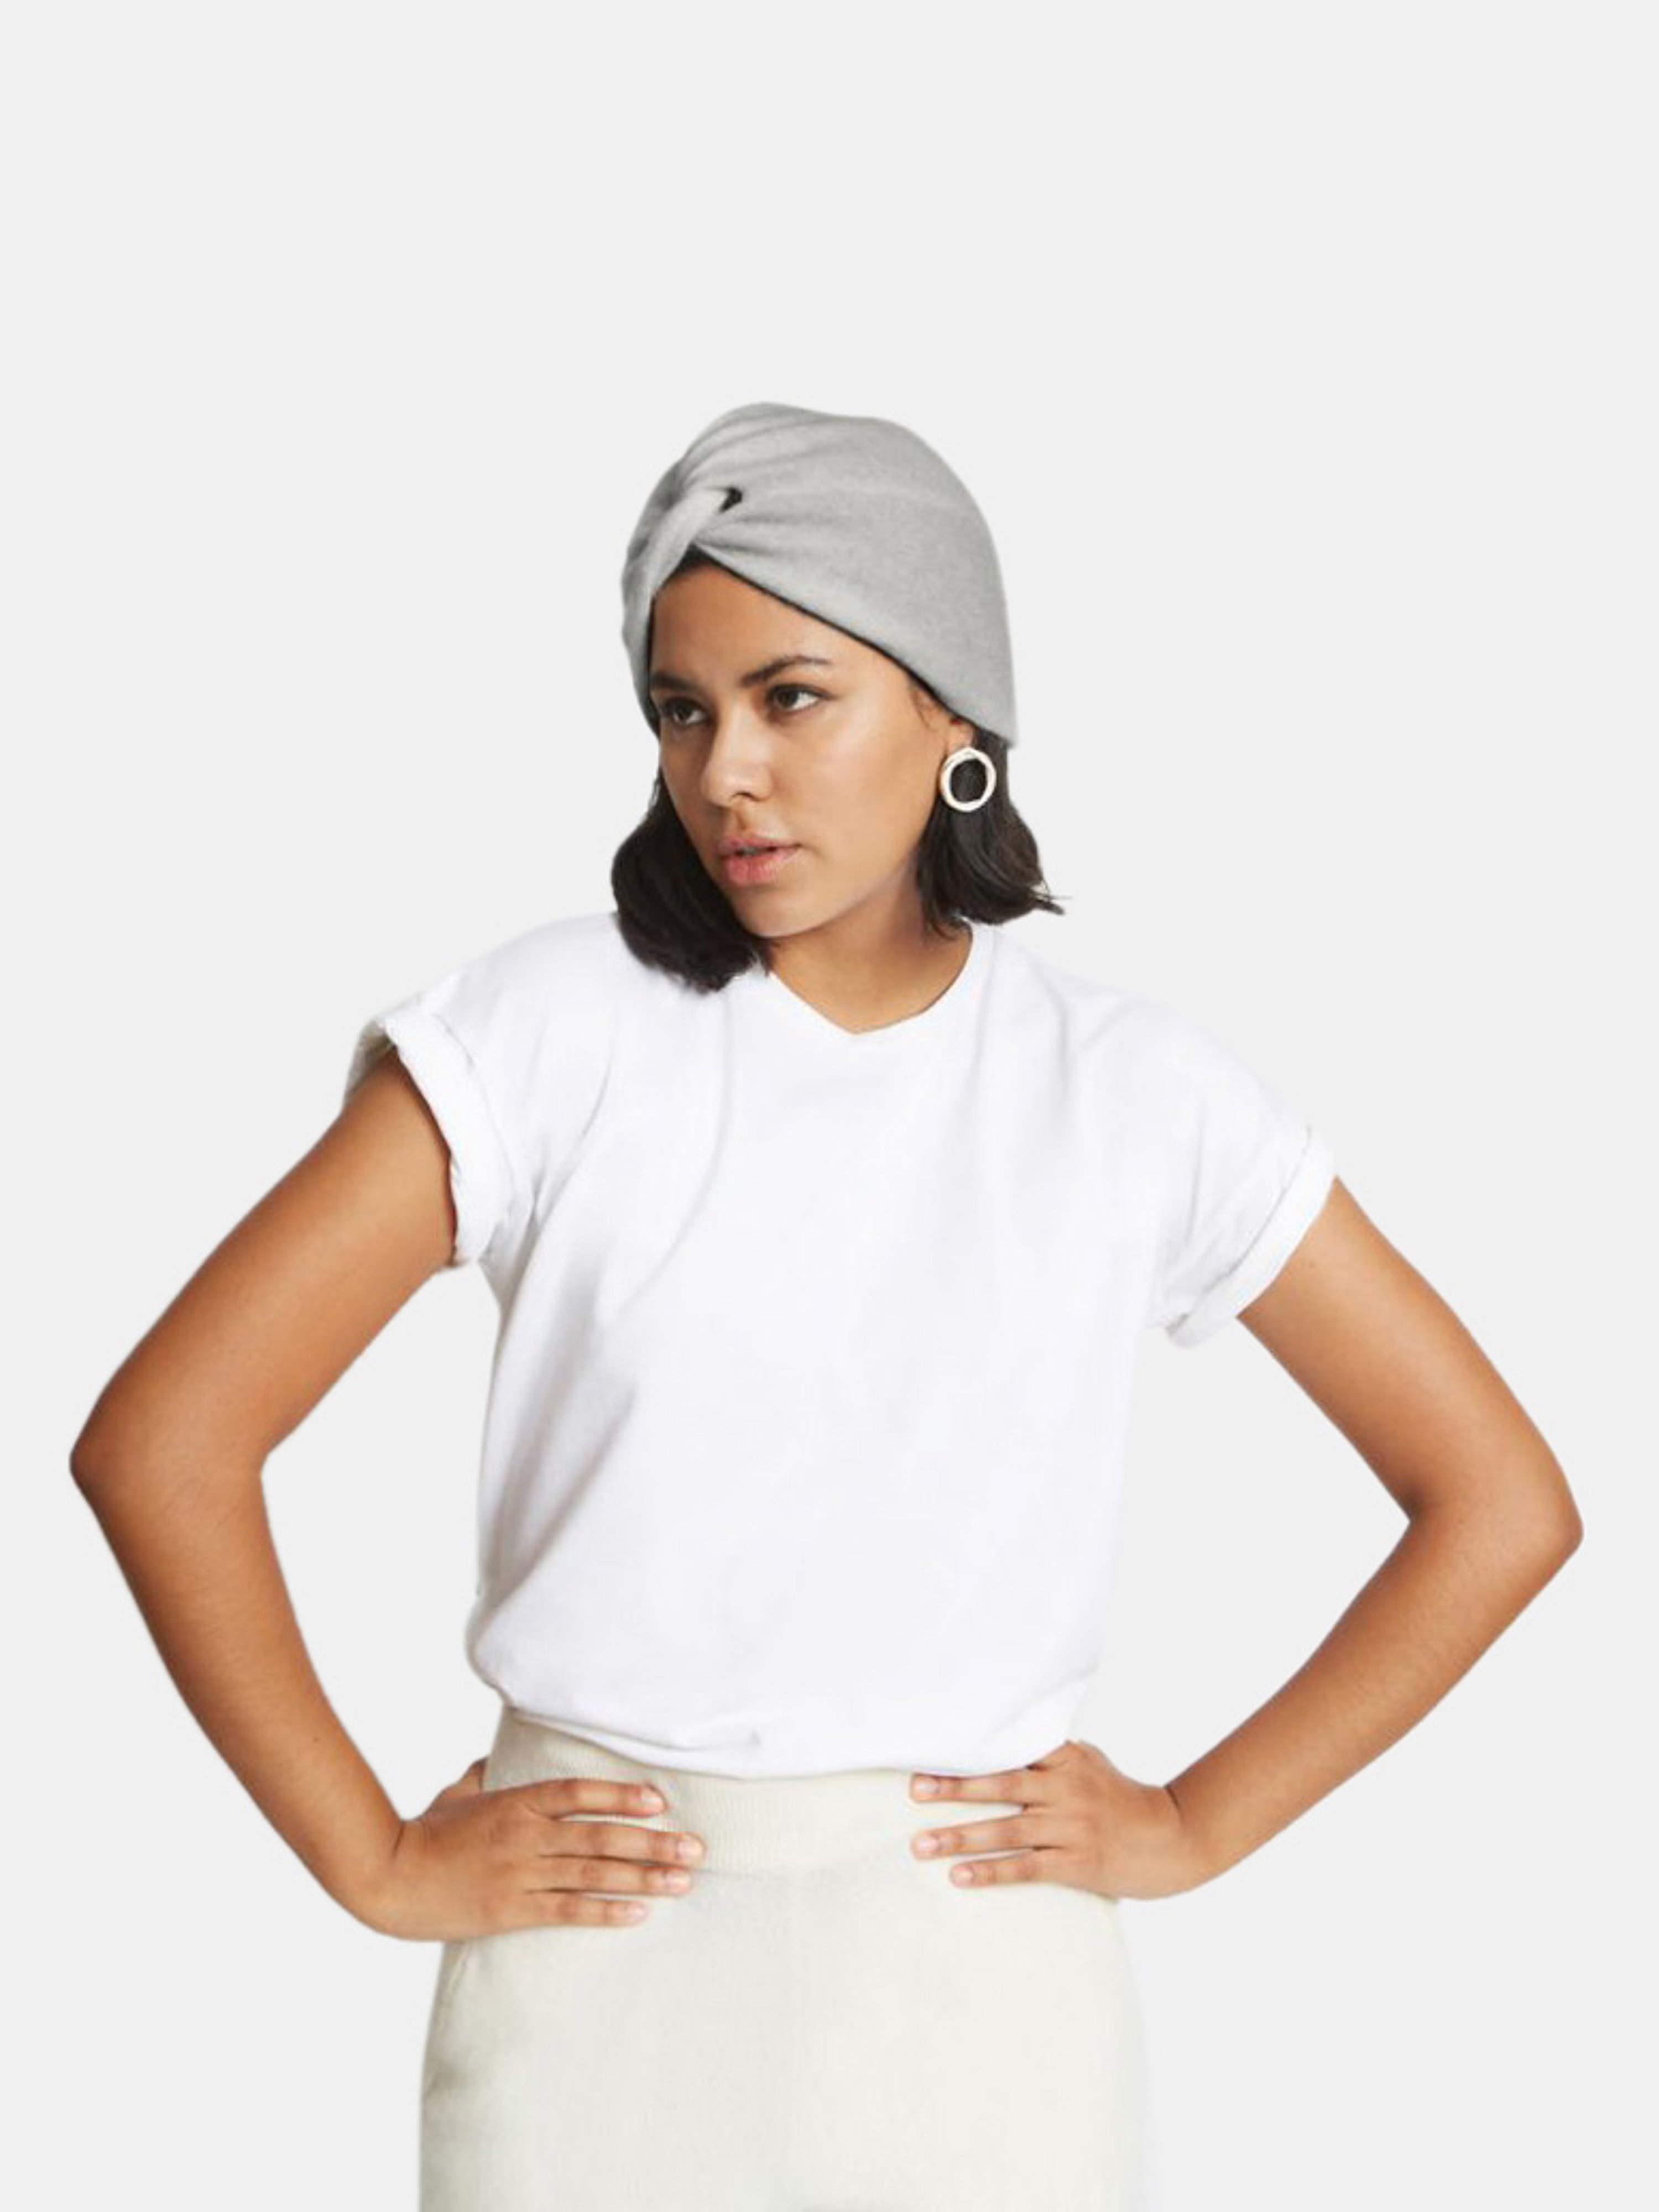 Santicler Stacy Cashmere Turban Hat In Grey